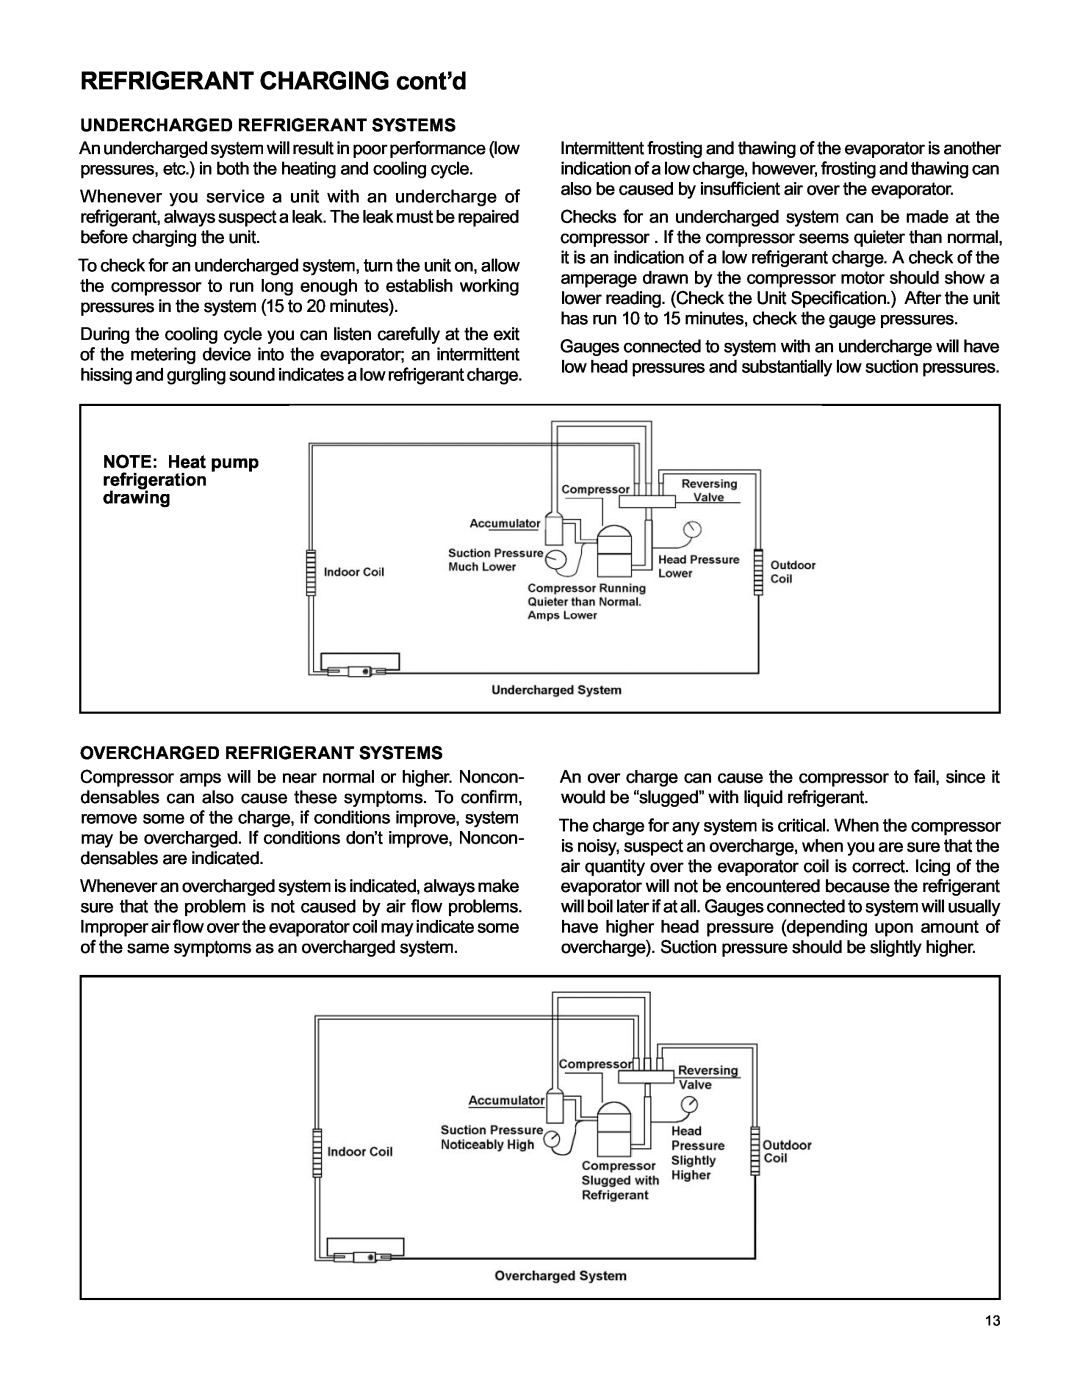 Friedrich RAC-SVC-06 REFRIGERANT CHARGING cont’d, Undercharged Refrigerant Systems, NOTE Heat pump refrigeration drawing 